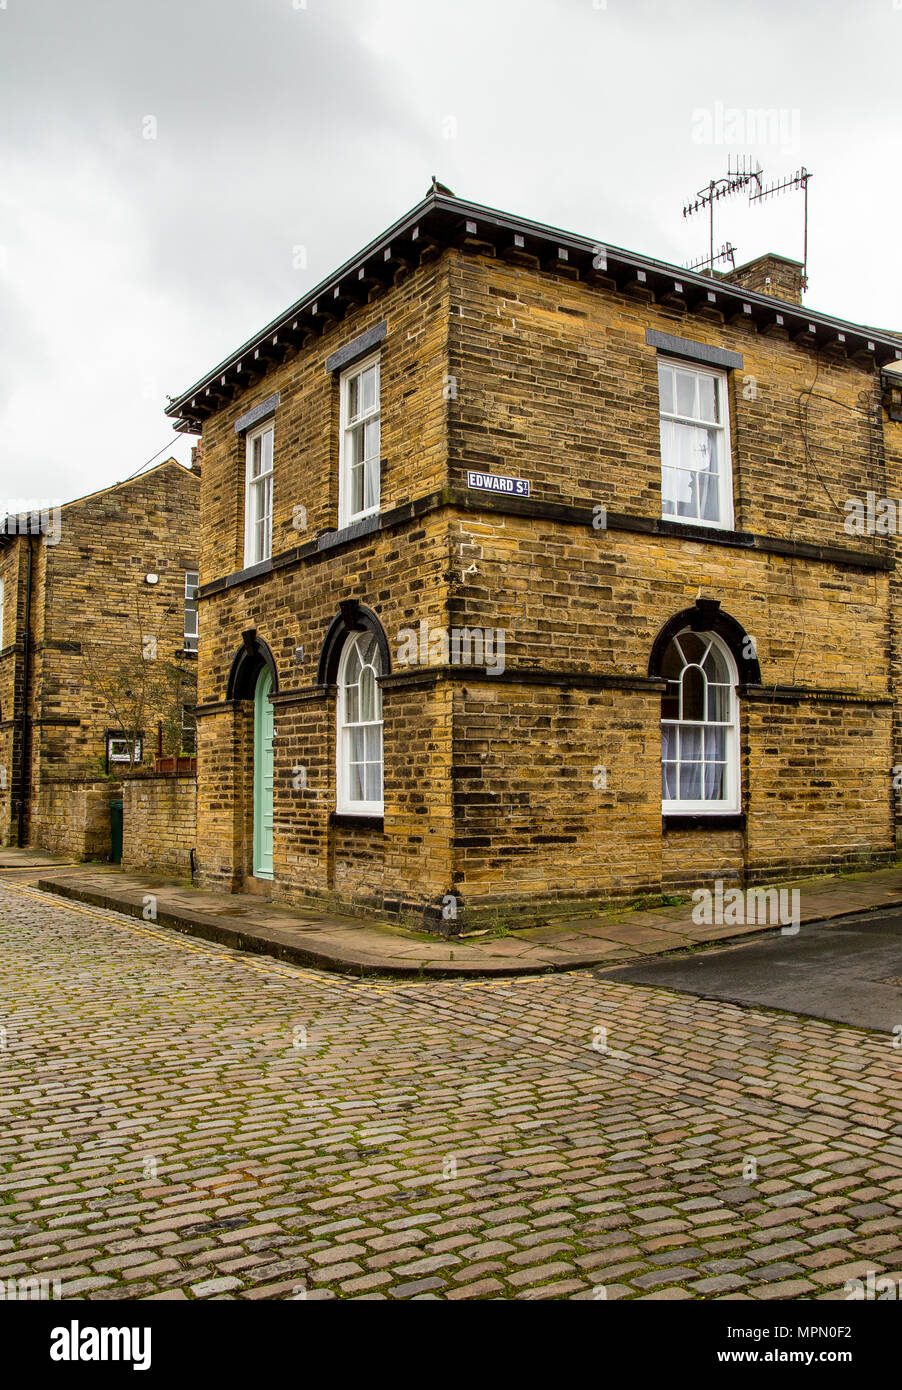 Cobbled streets of Saltaire village in West Yorkshire. Saltaire is a UNESCO designated World Heritage Site. Stock Photo